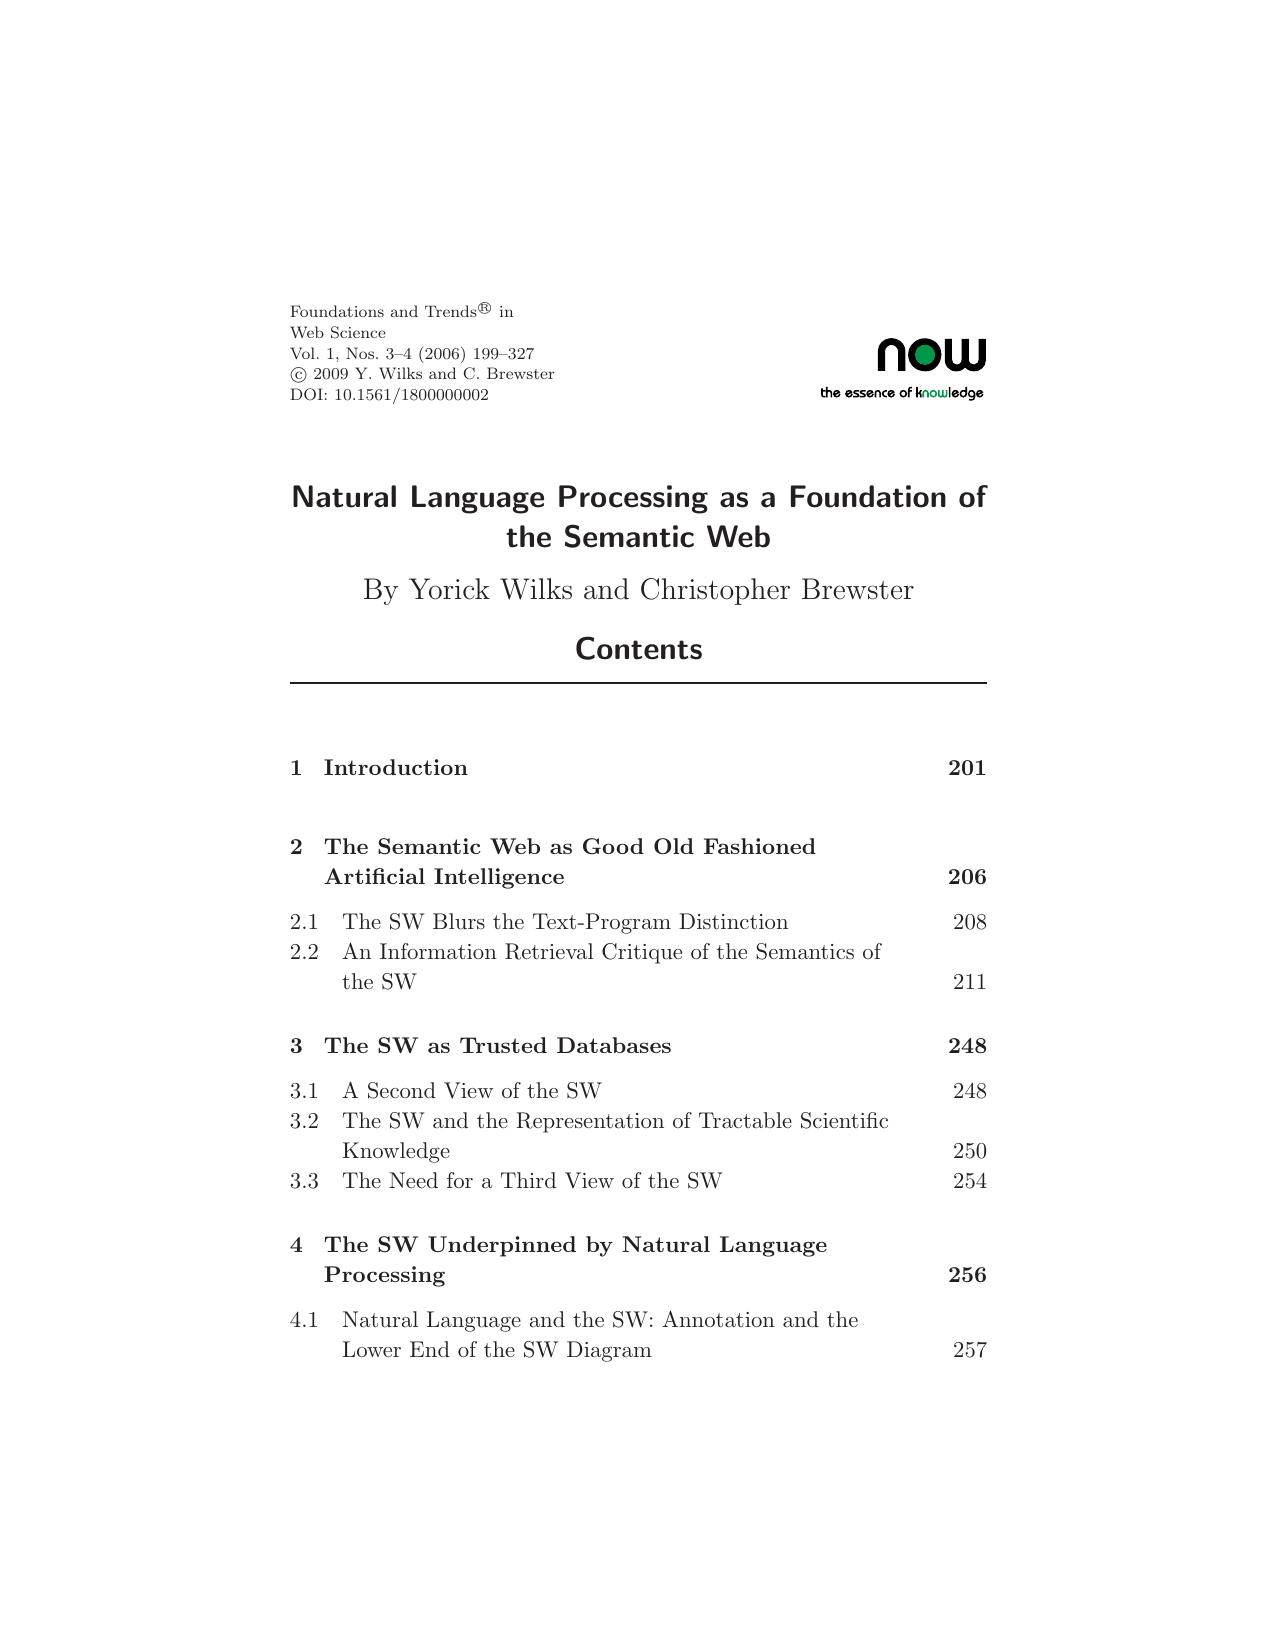 Natural Language Processing as a Foundation of the Semantic Web - Paper